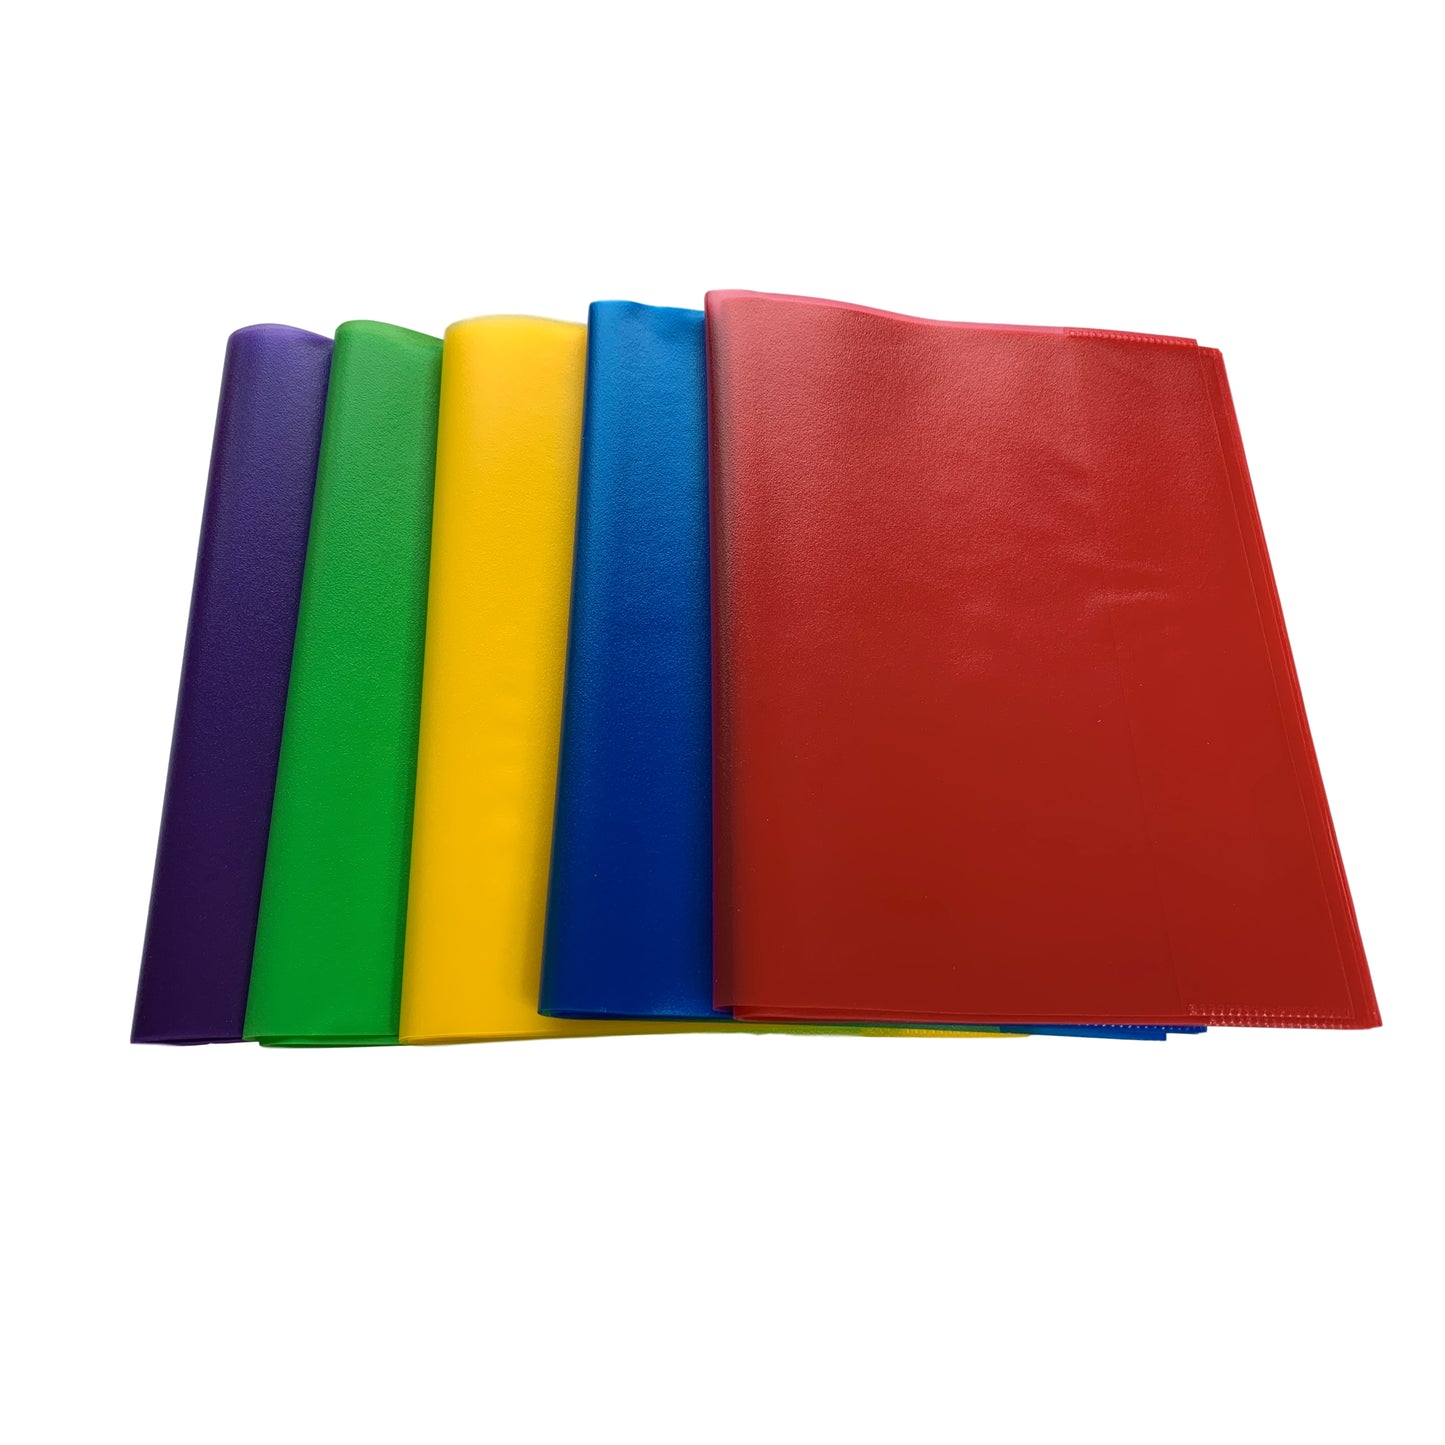 Pack of 10 9x7" Frosted Red Exercise Book Covers